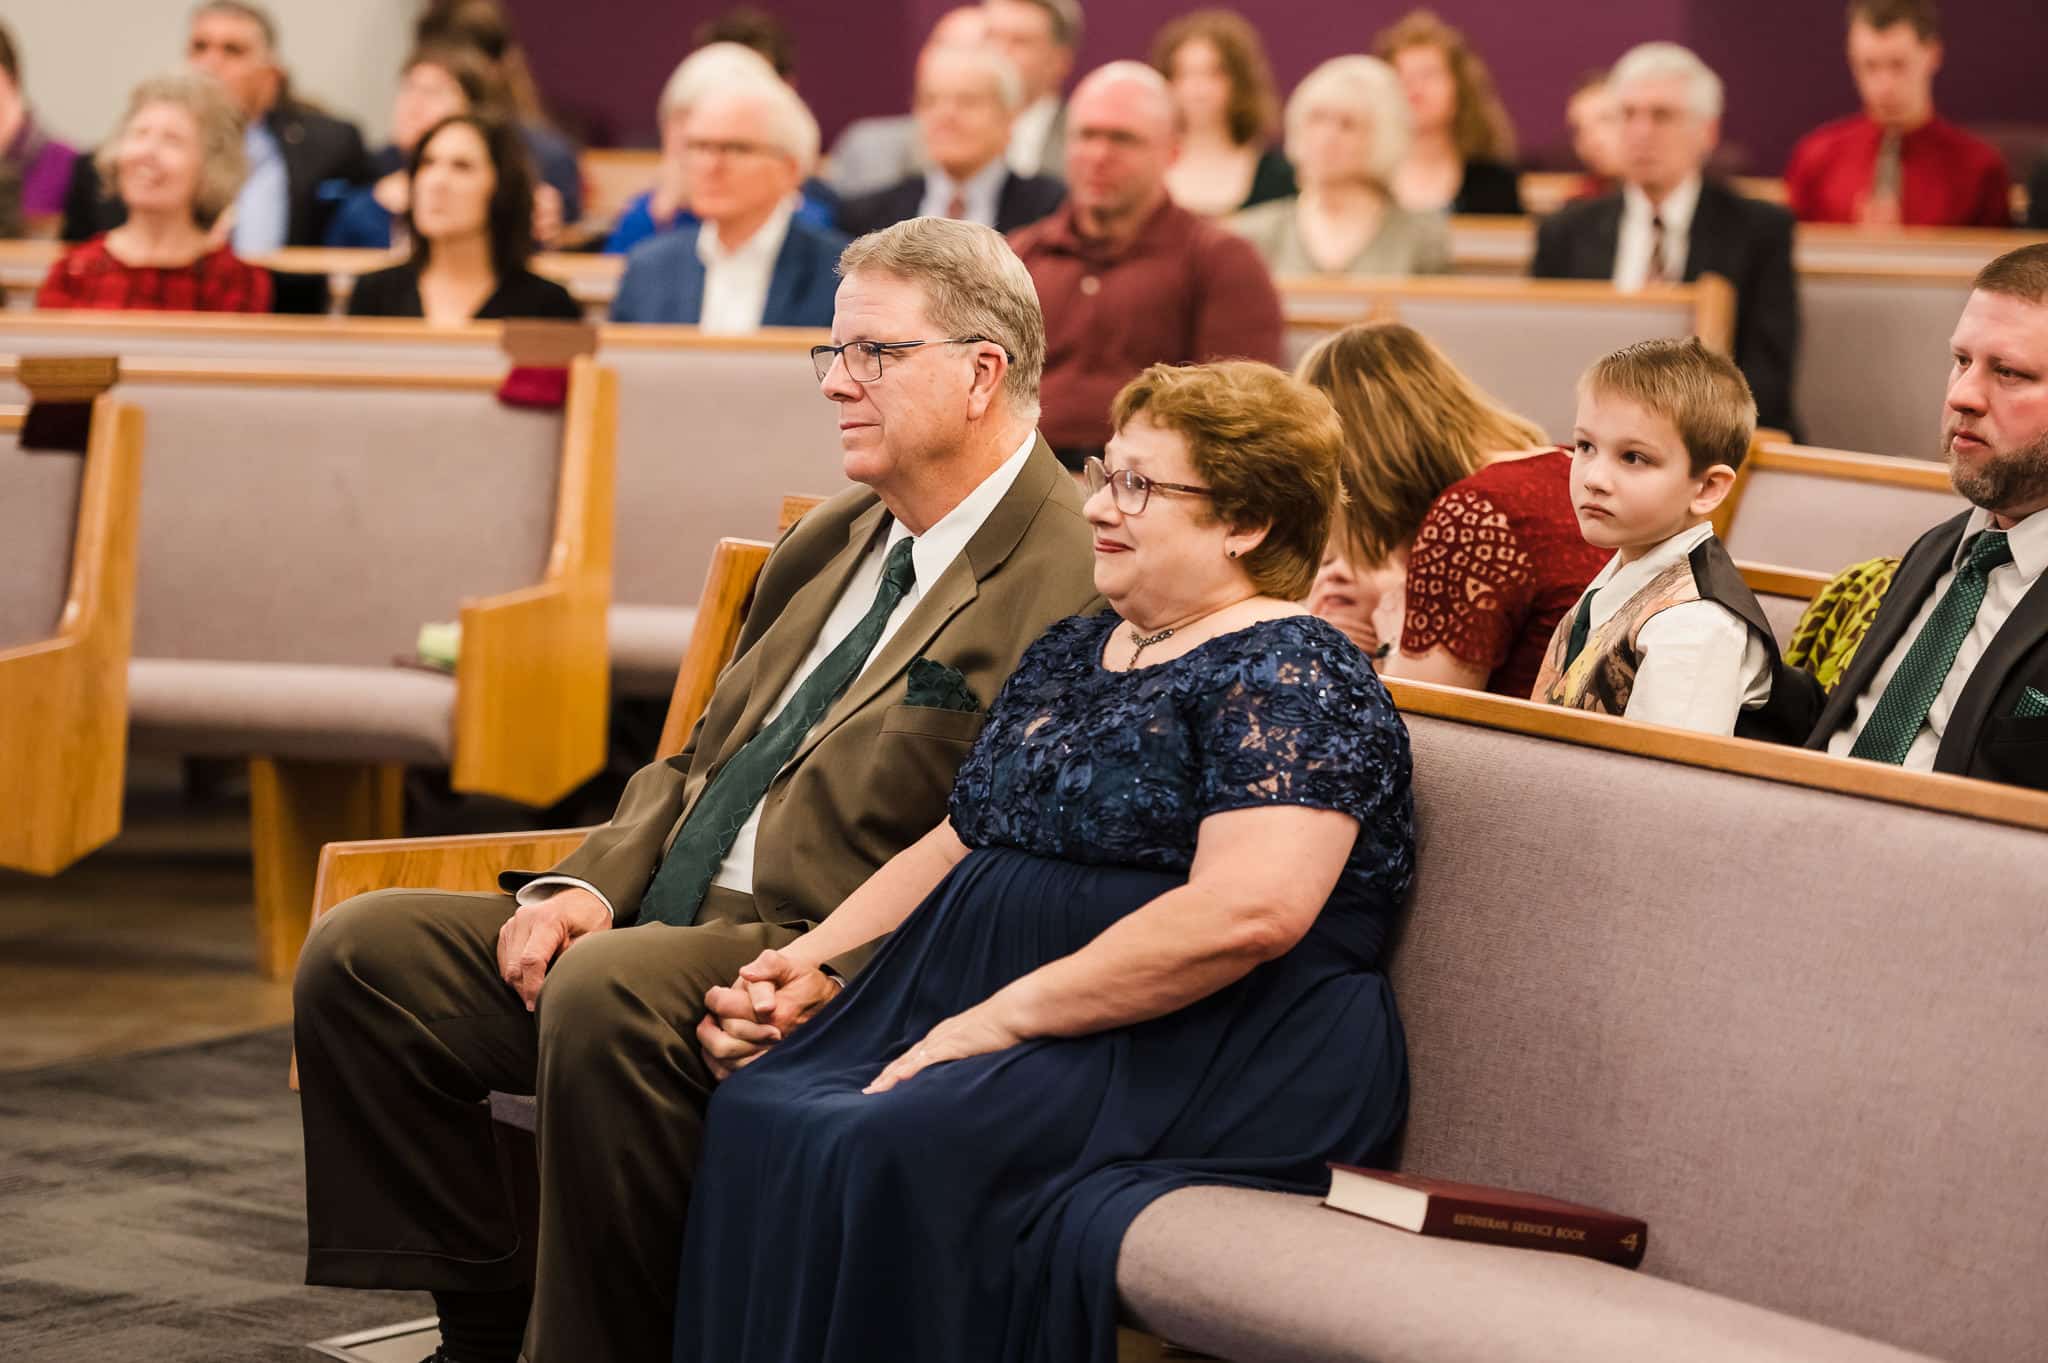 The parents of the bride seated with the congregation during their daughter's wedding.